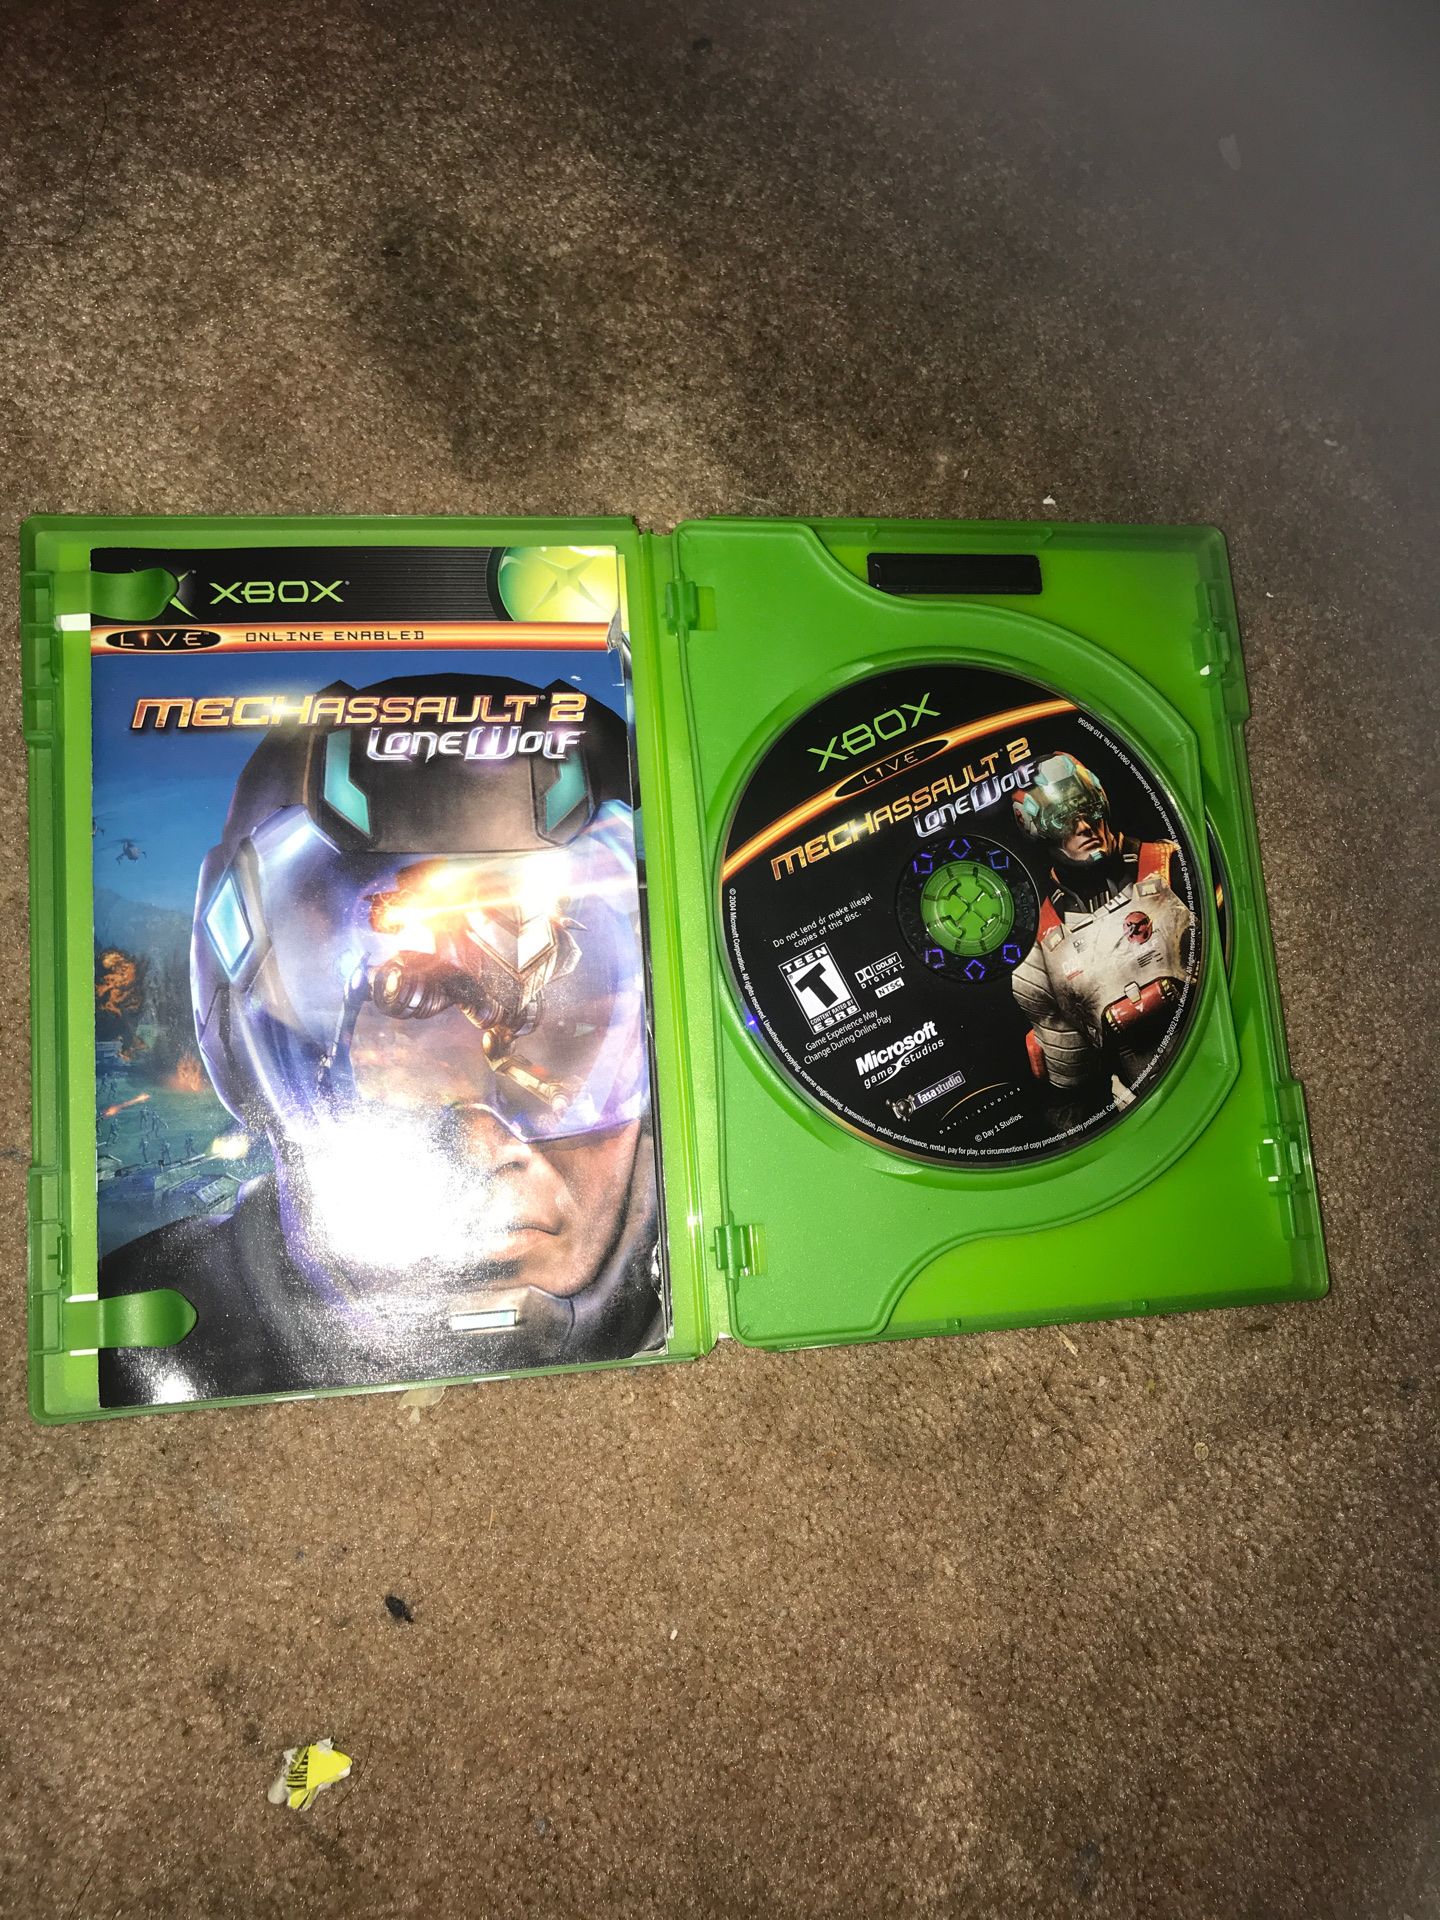 Xbox Limited edition Mechassault 2 / lone wolf